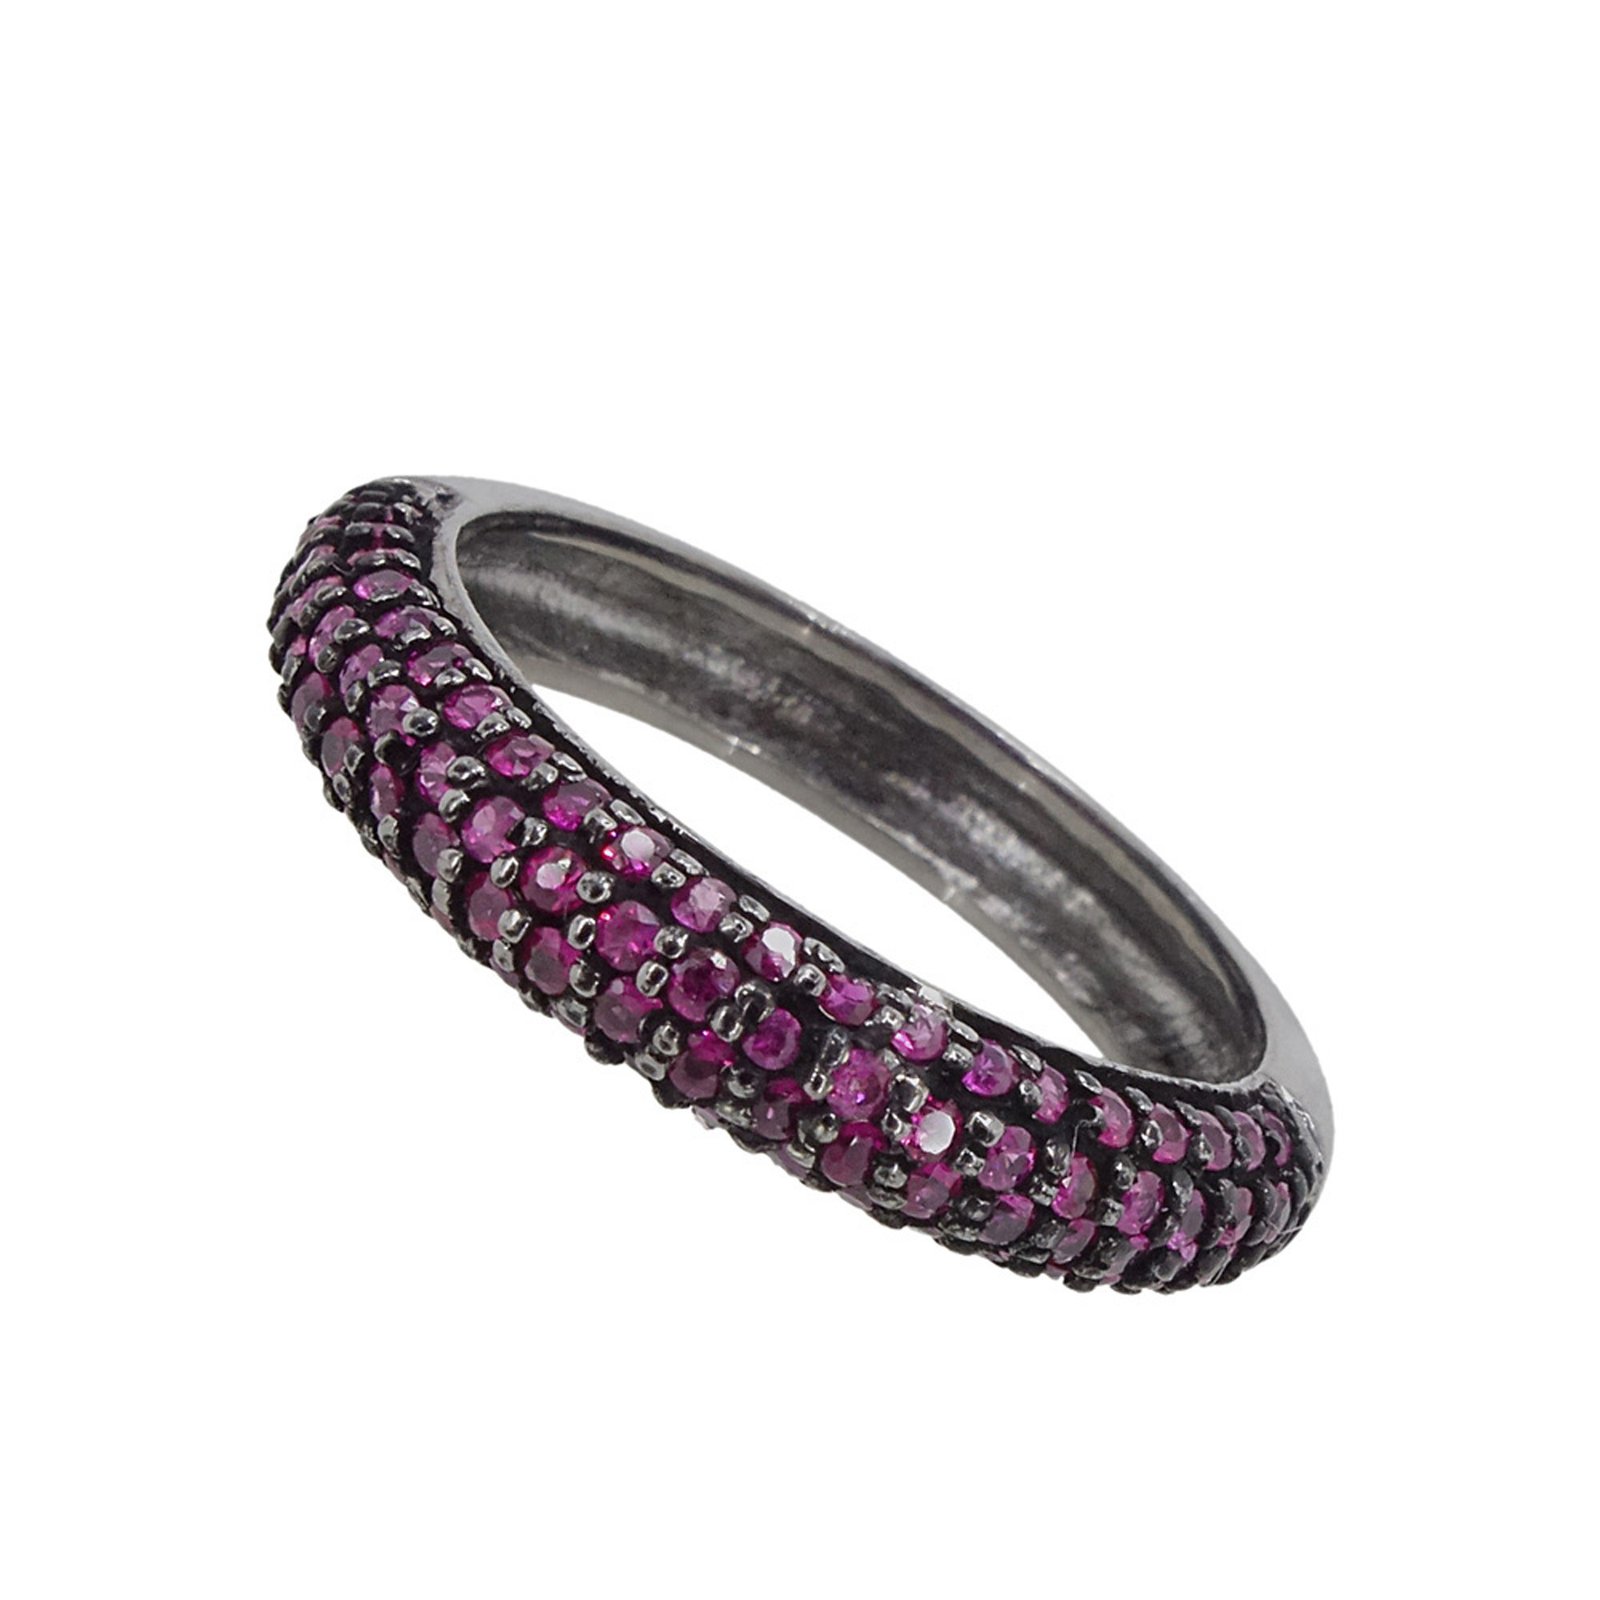 Real pave ruby gemstone full eternity band ring, 925 sterling silver jewelry